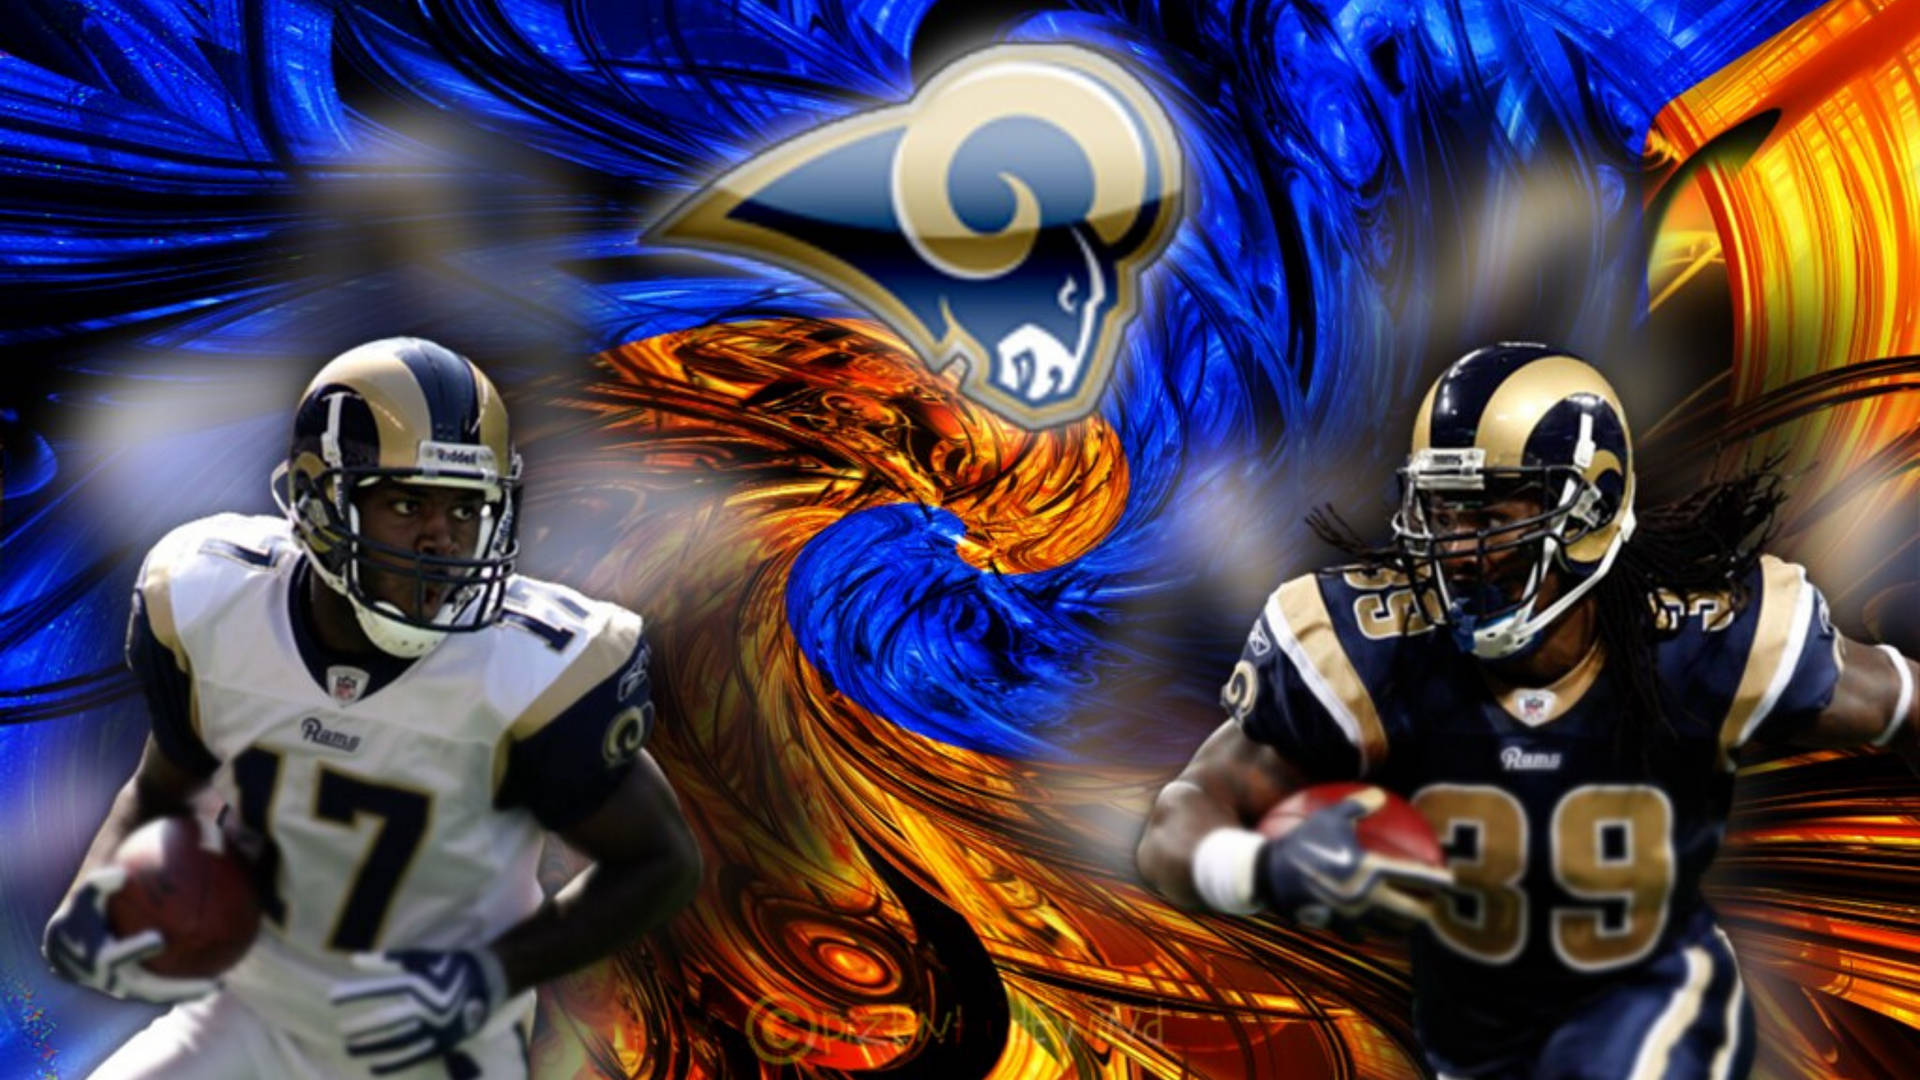 Losangeles Rams 17 Och 39. (there Is No Additional Context Provided, So This Is A Direct Translation.) Wallpaper